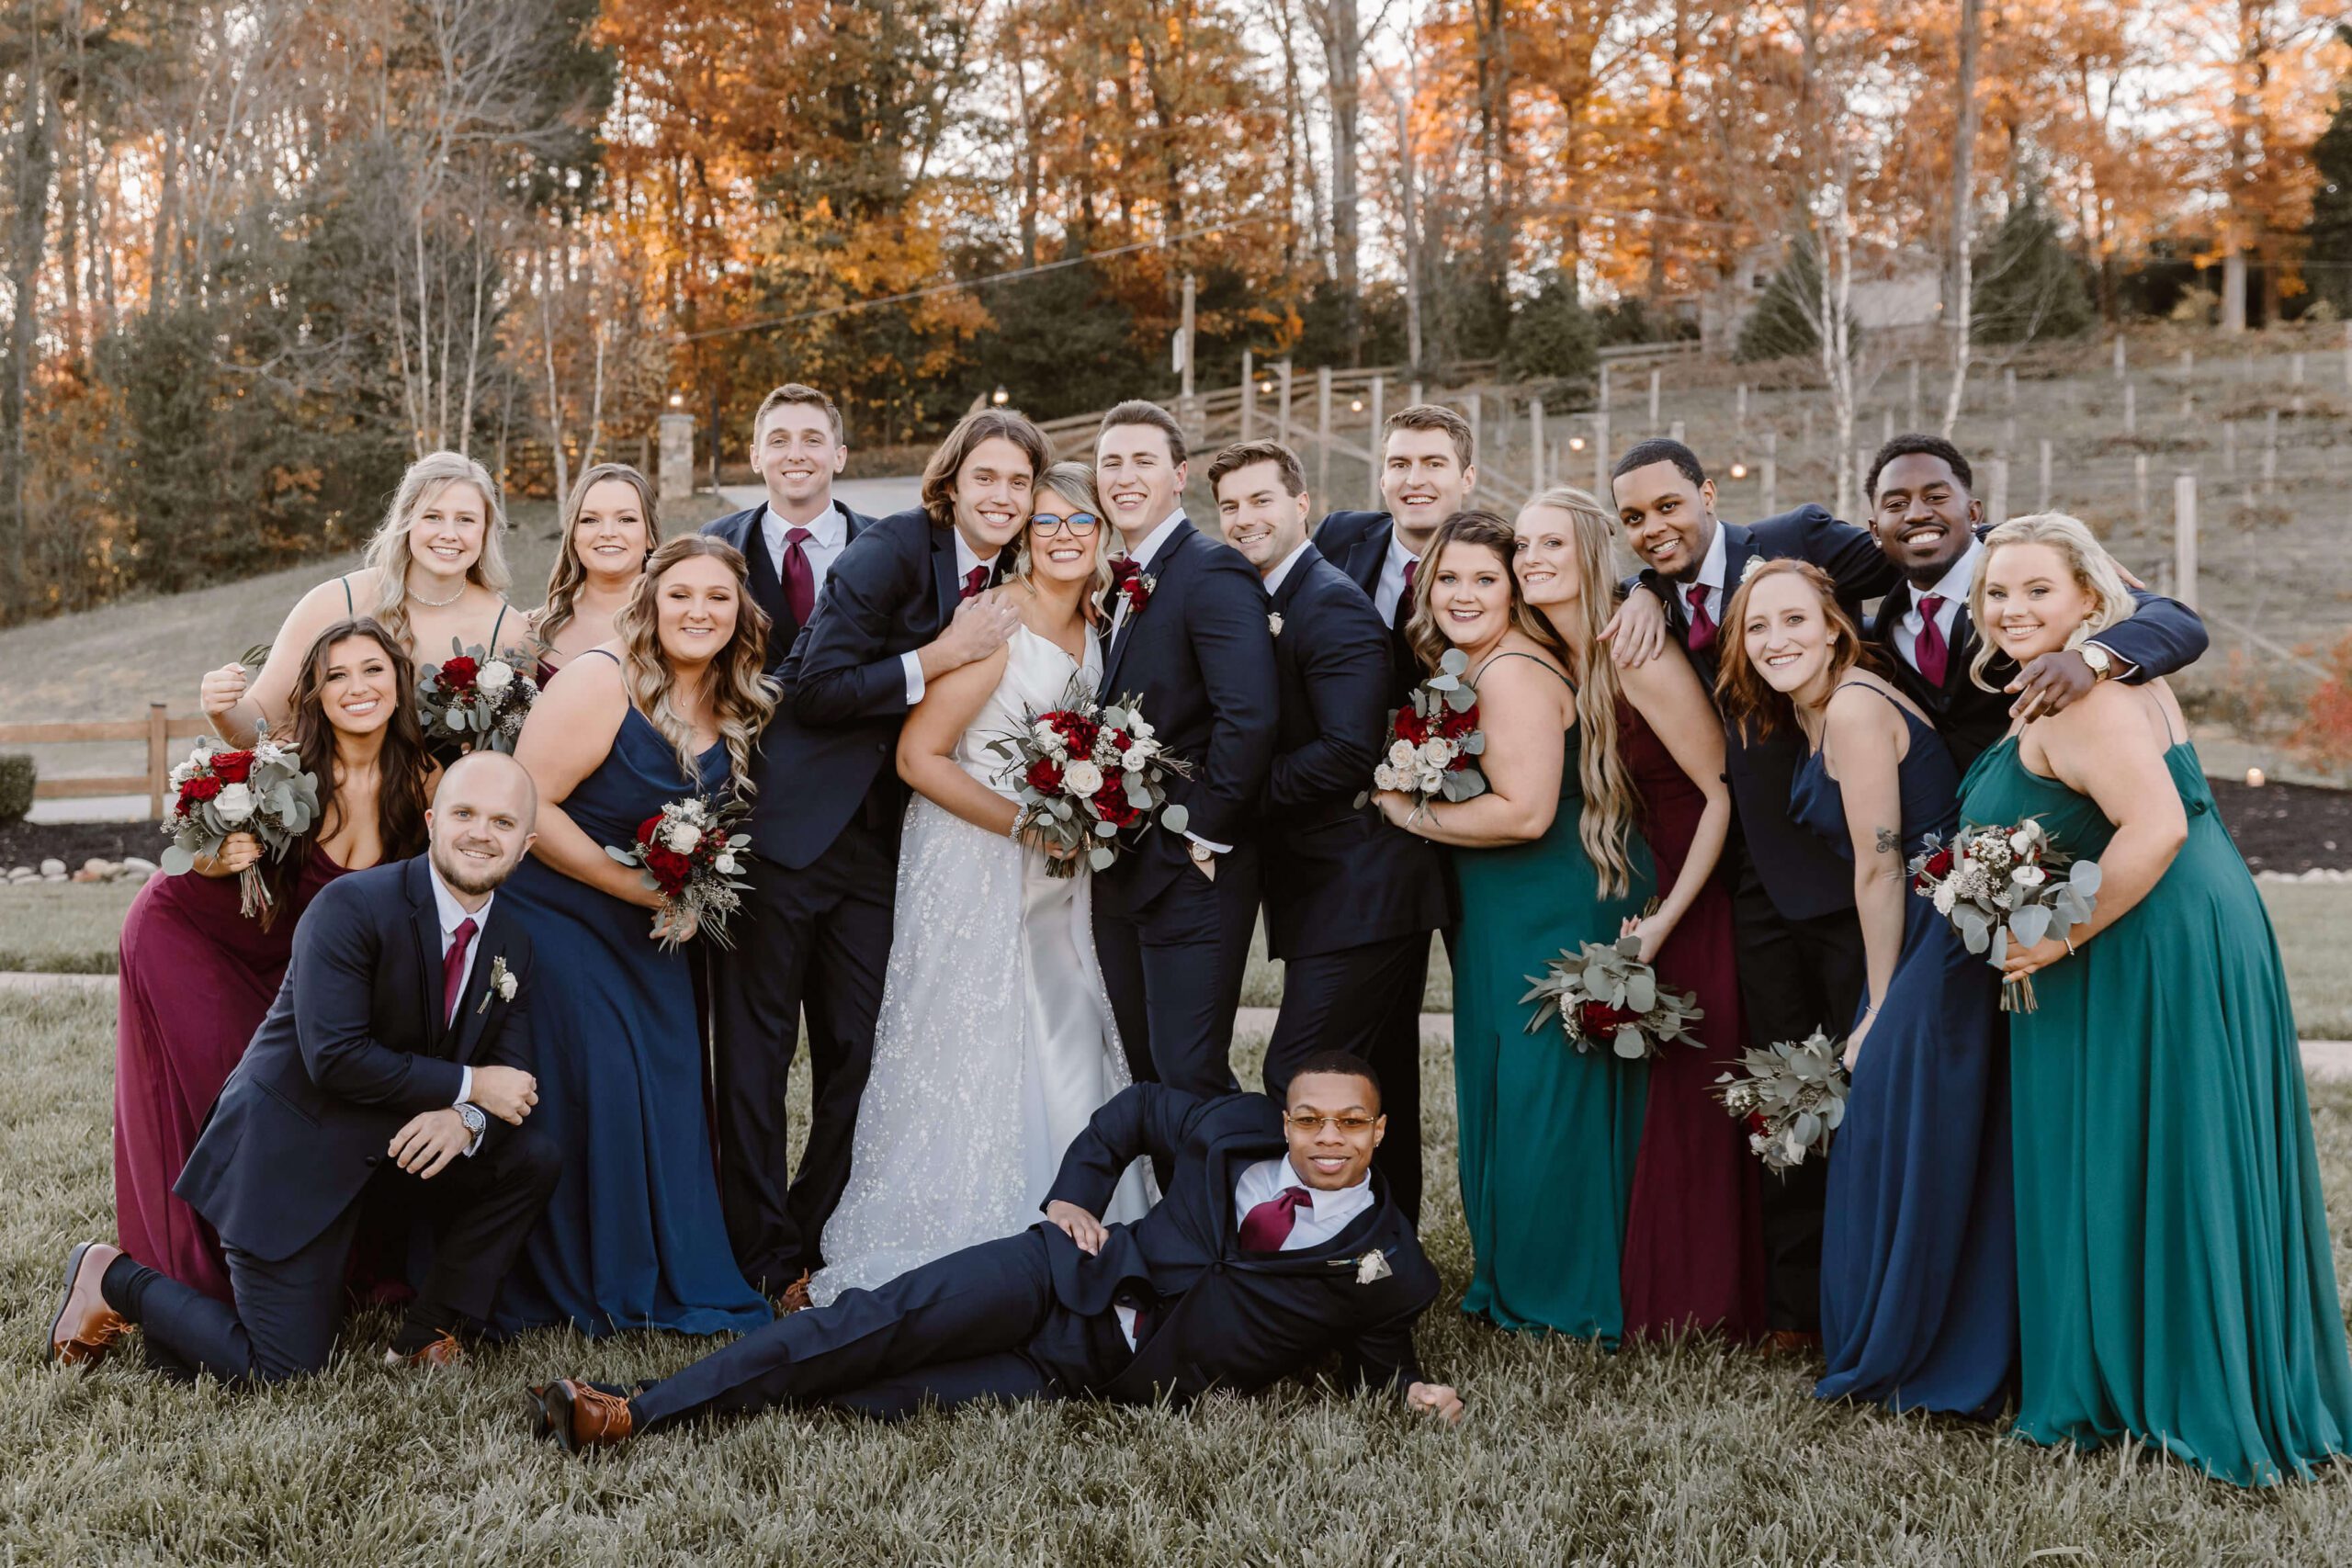 group photo of bride groom wedding party by Erin Morrison Photography